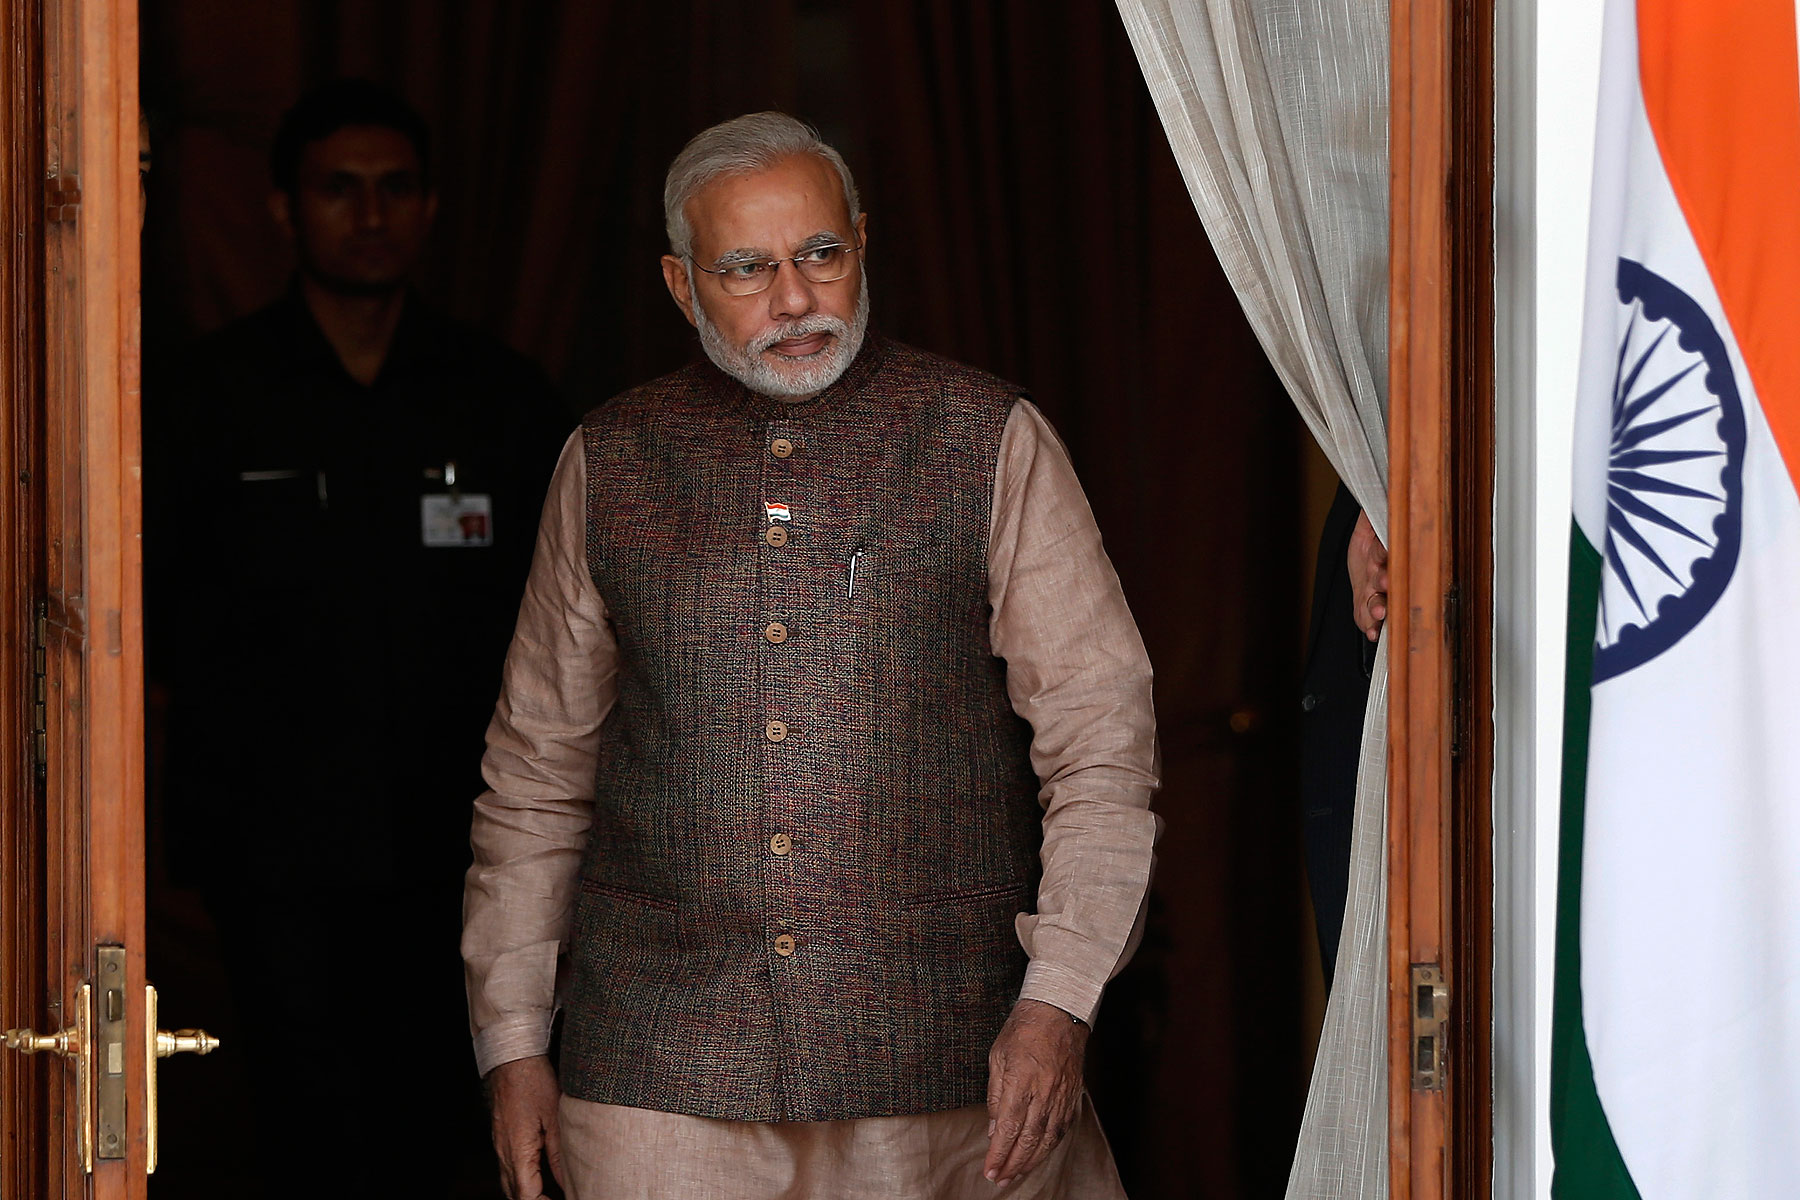 India's Prime Minister Narendra Modi comes out of a meeting room to receive his Bhutanese counterpart Tshering Tobgay before the start a bilateral meeting in New Delhi on May 27, 2014 (Adnan Abidi—Reuters)